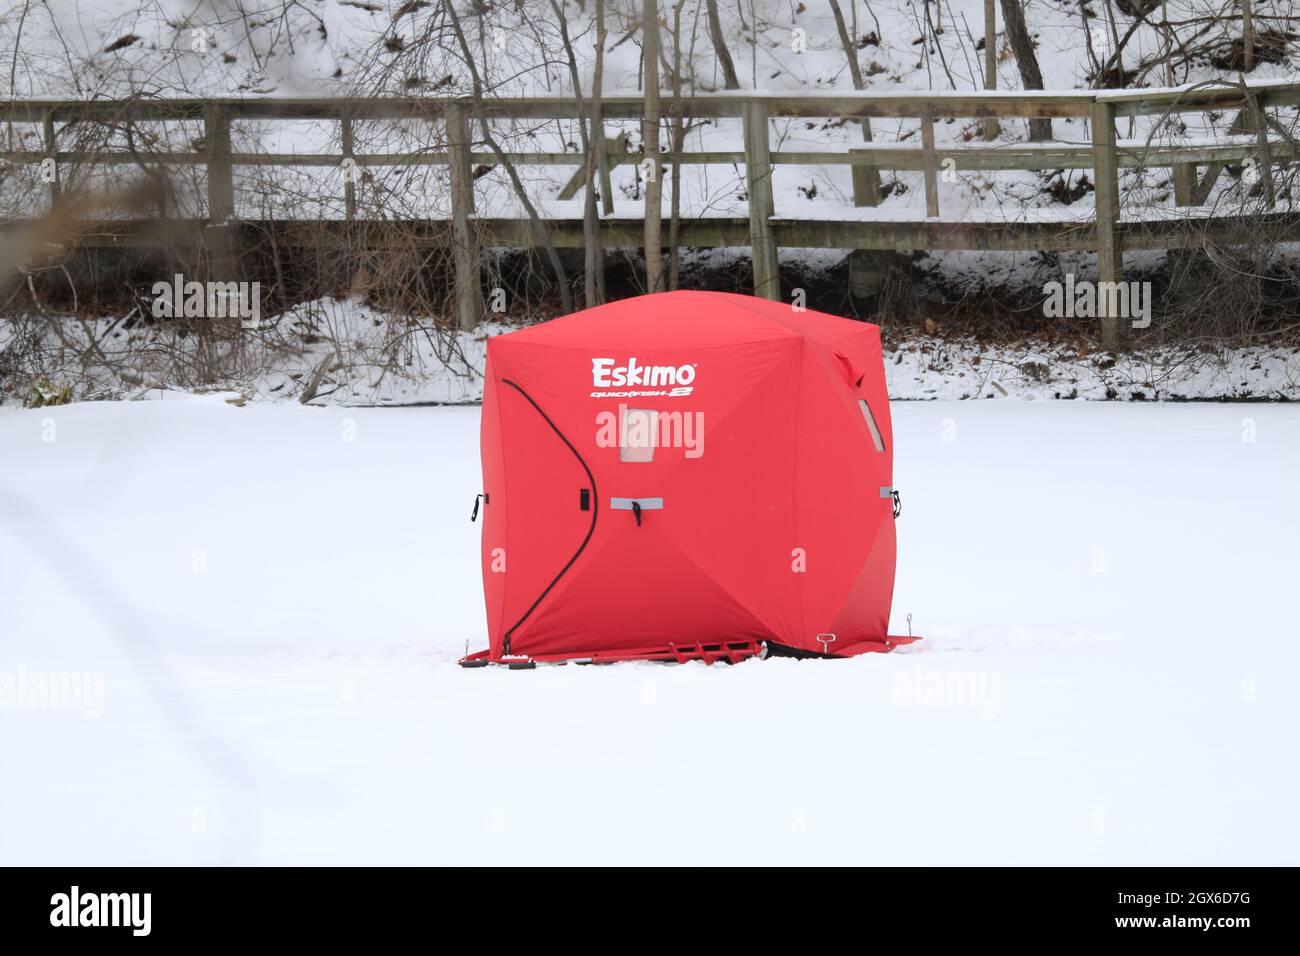 LONDON, CANADA - Jan 01, 2021: A red Eskimo brand ice fishing tent on a  frozen pond in Canada Stock Photo - Alamy